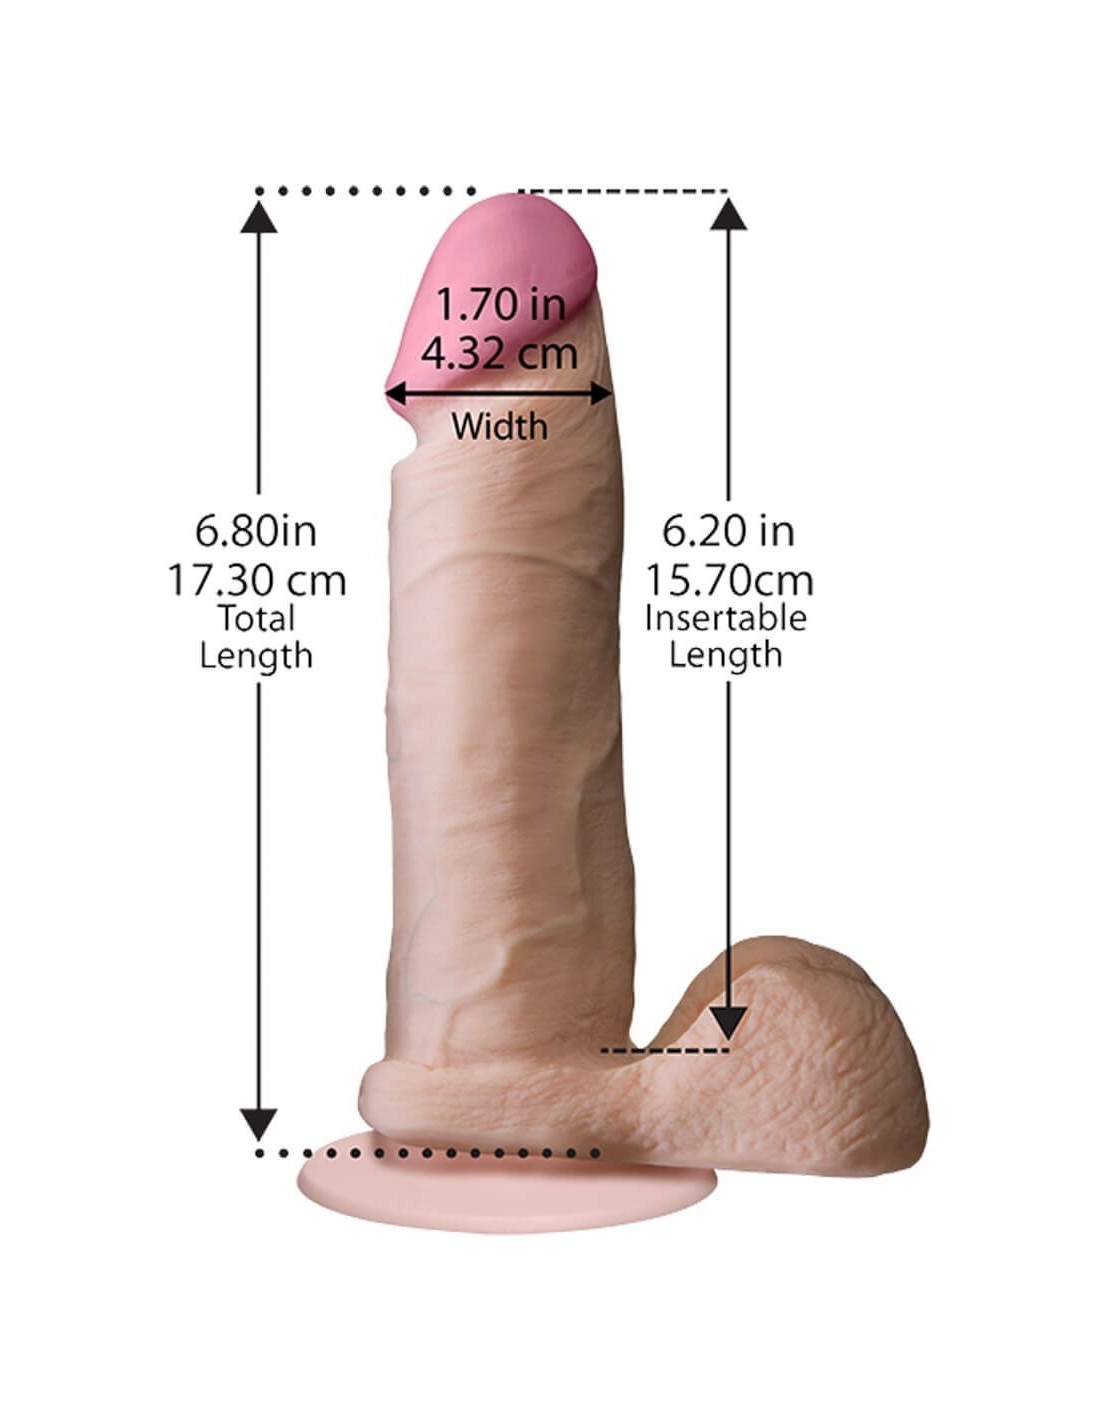 ashley naus recommends what does a 6 inch dick look like pic